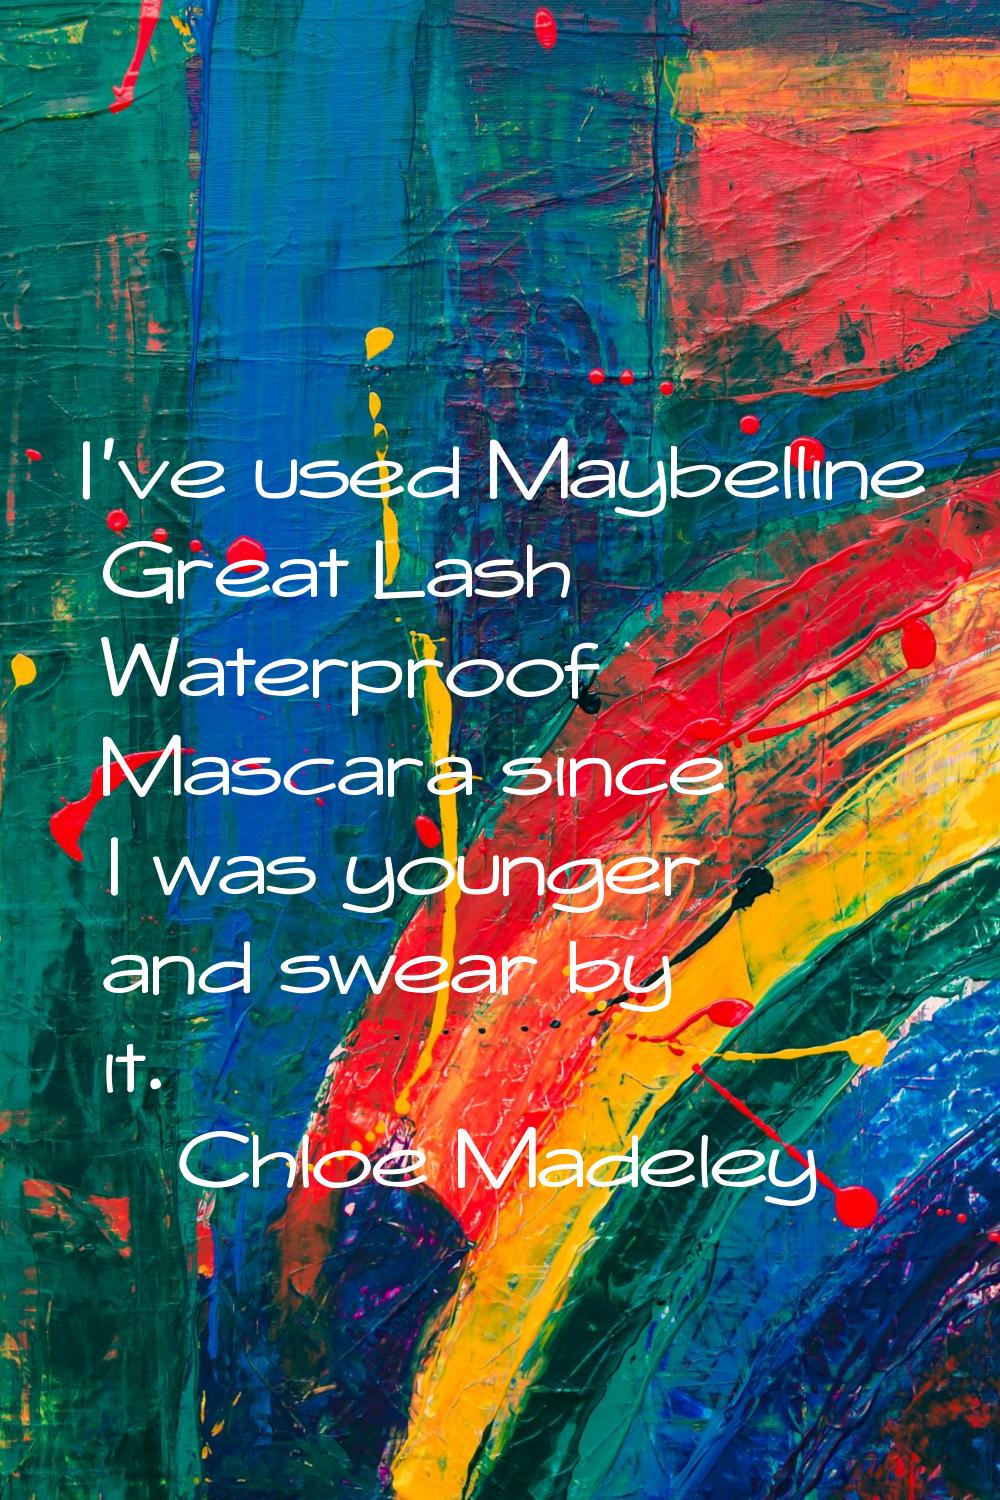 I've used Maybelline Great Lash Waterproof Mascara since I was younger and swear by it.